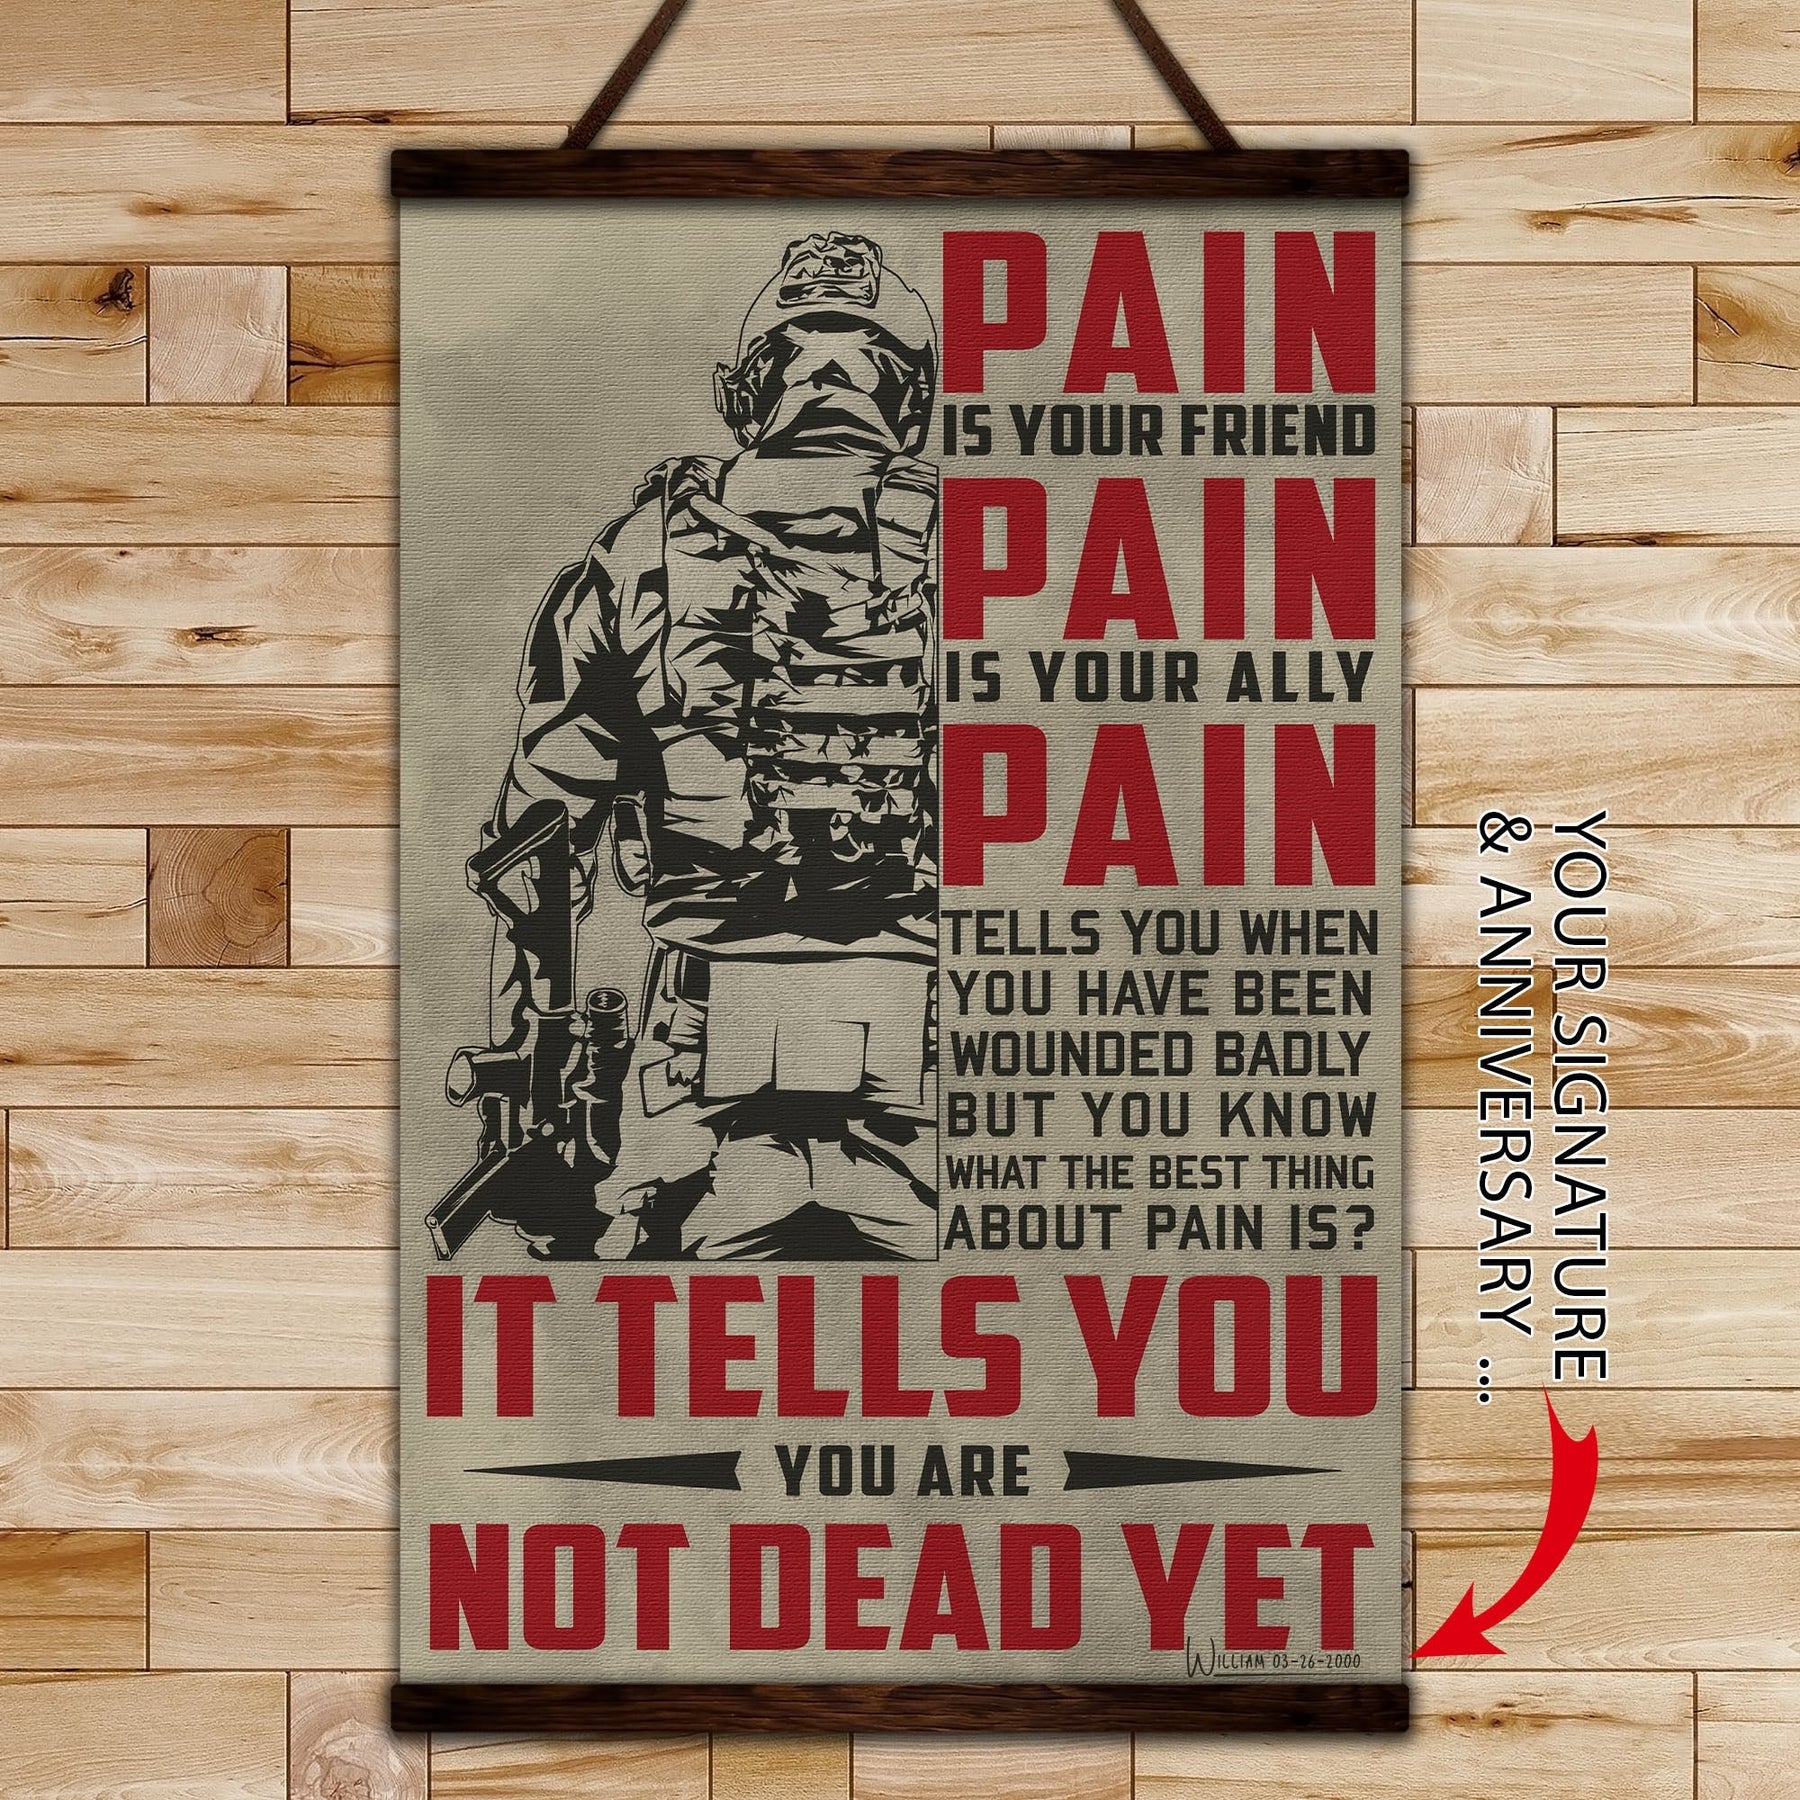 SD017 - PAIN - It Tells You - You Are Not Dead Yet - Soldier - Vertical Poster - Vertical Canvas - Soldier Poster